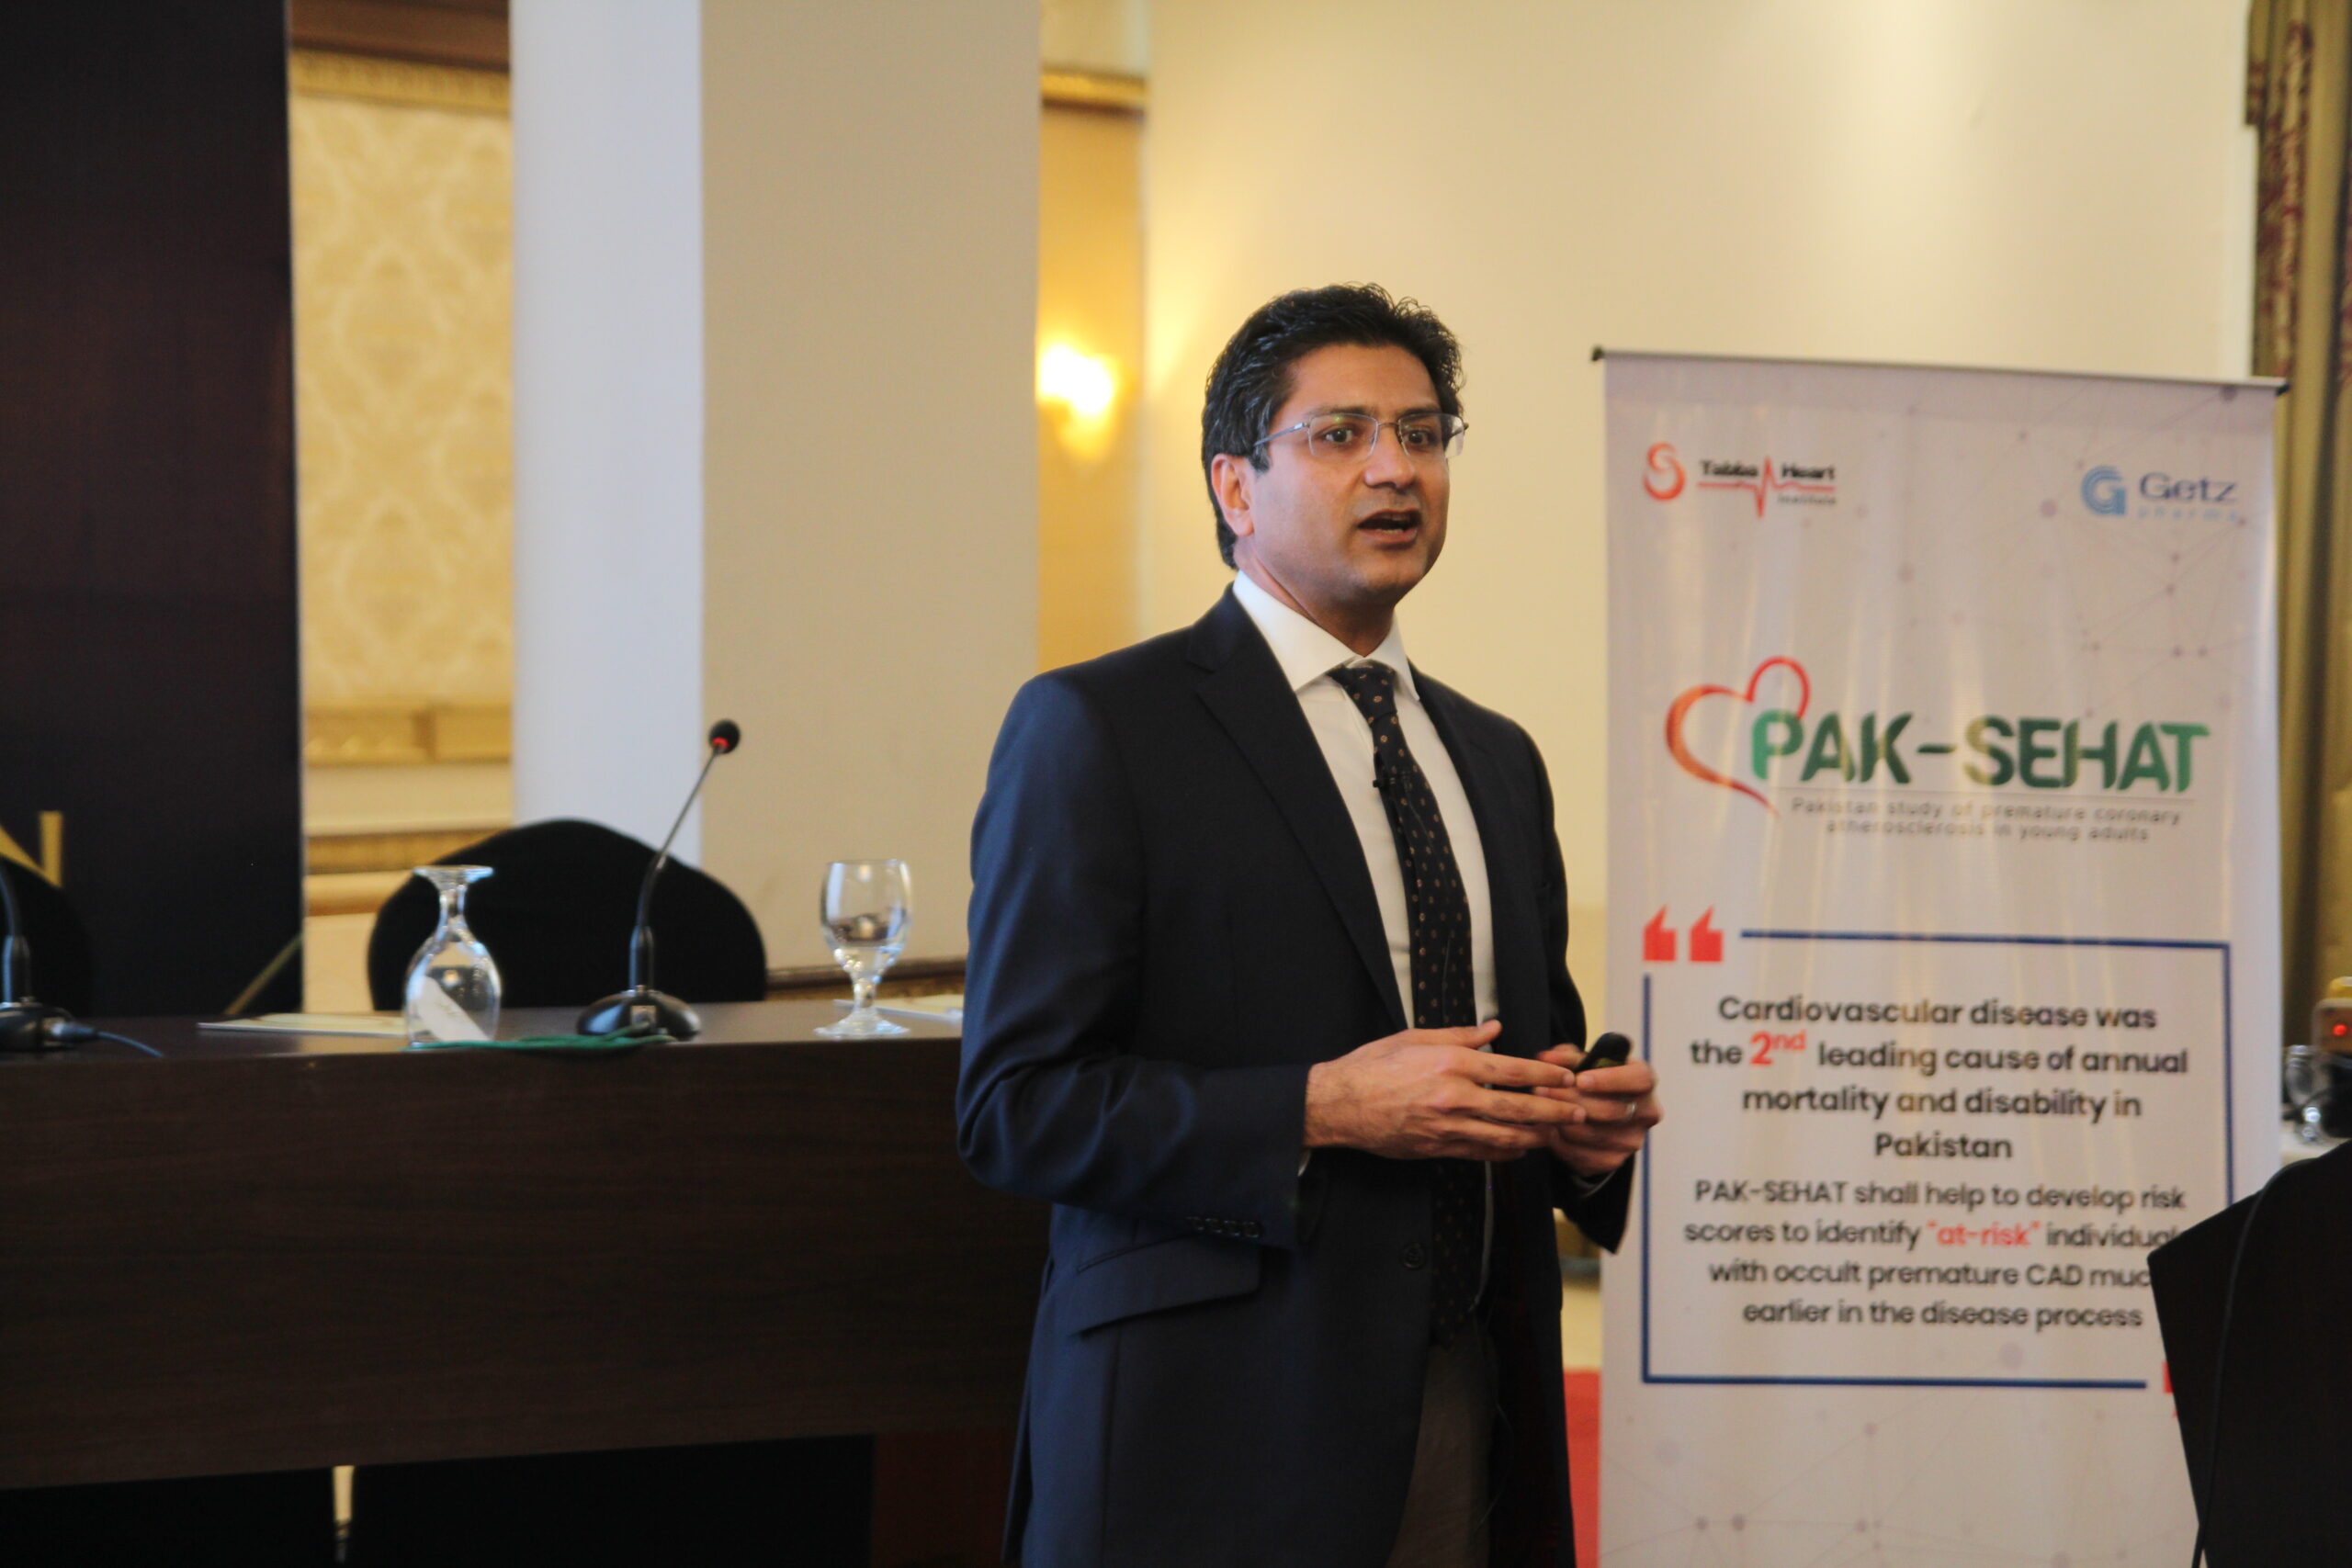 Getz Pharma Launched PAK-SEHAT Study at the 50th CardioCon Organized by the Pakistan Cardiac Society